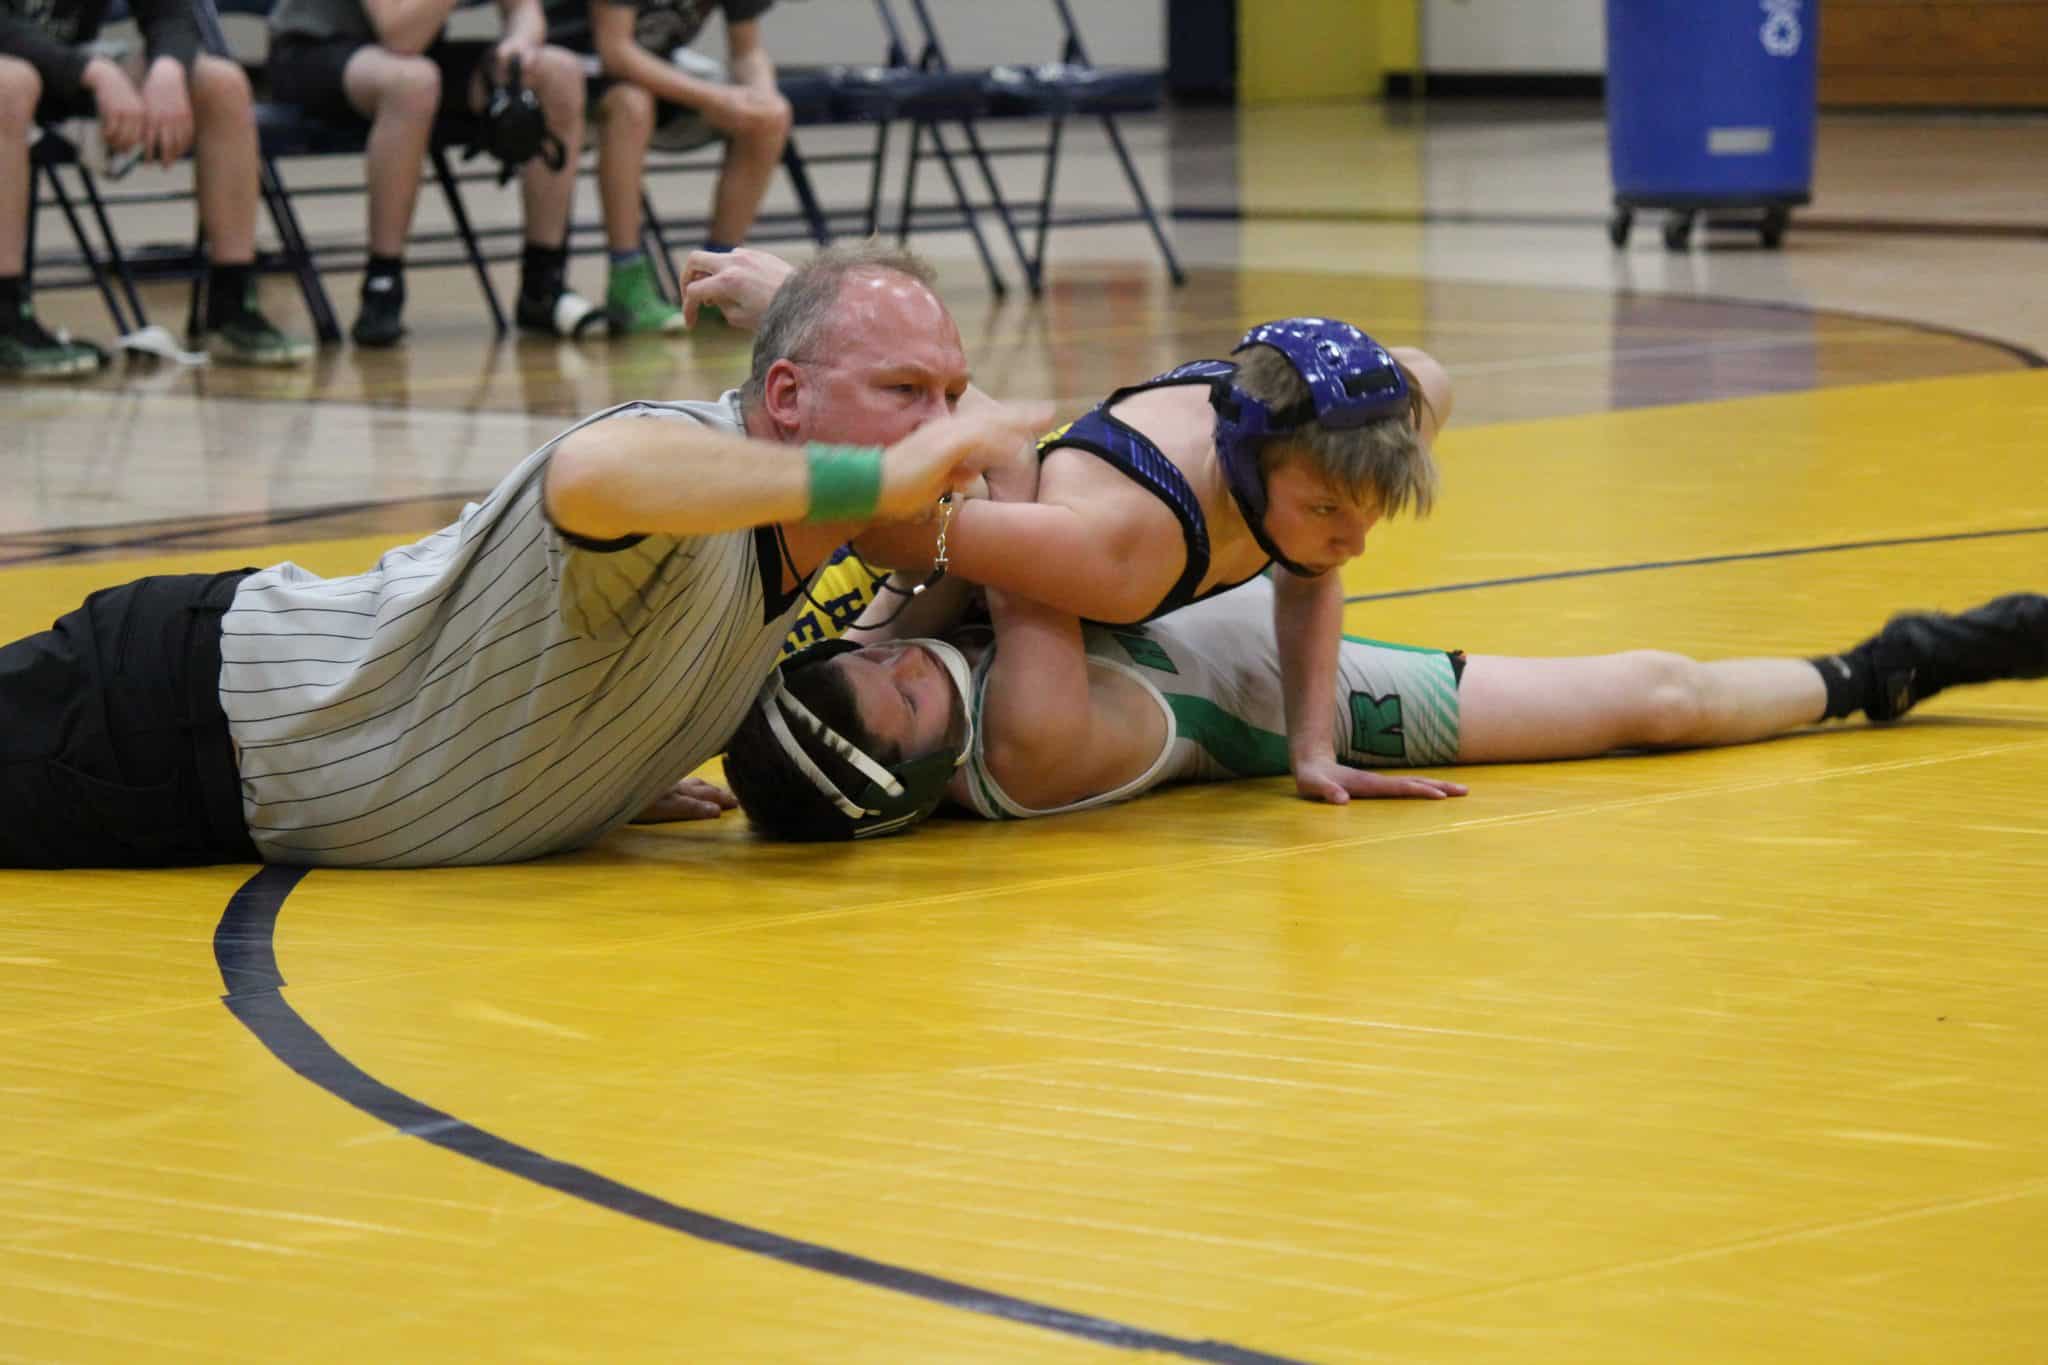 Hatchet grapplers dominate Rhinelander 63-9: Tomahawk wins 12-of-14 matches, including 7 pins